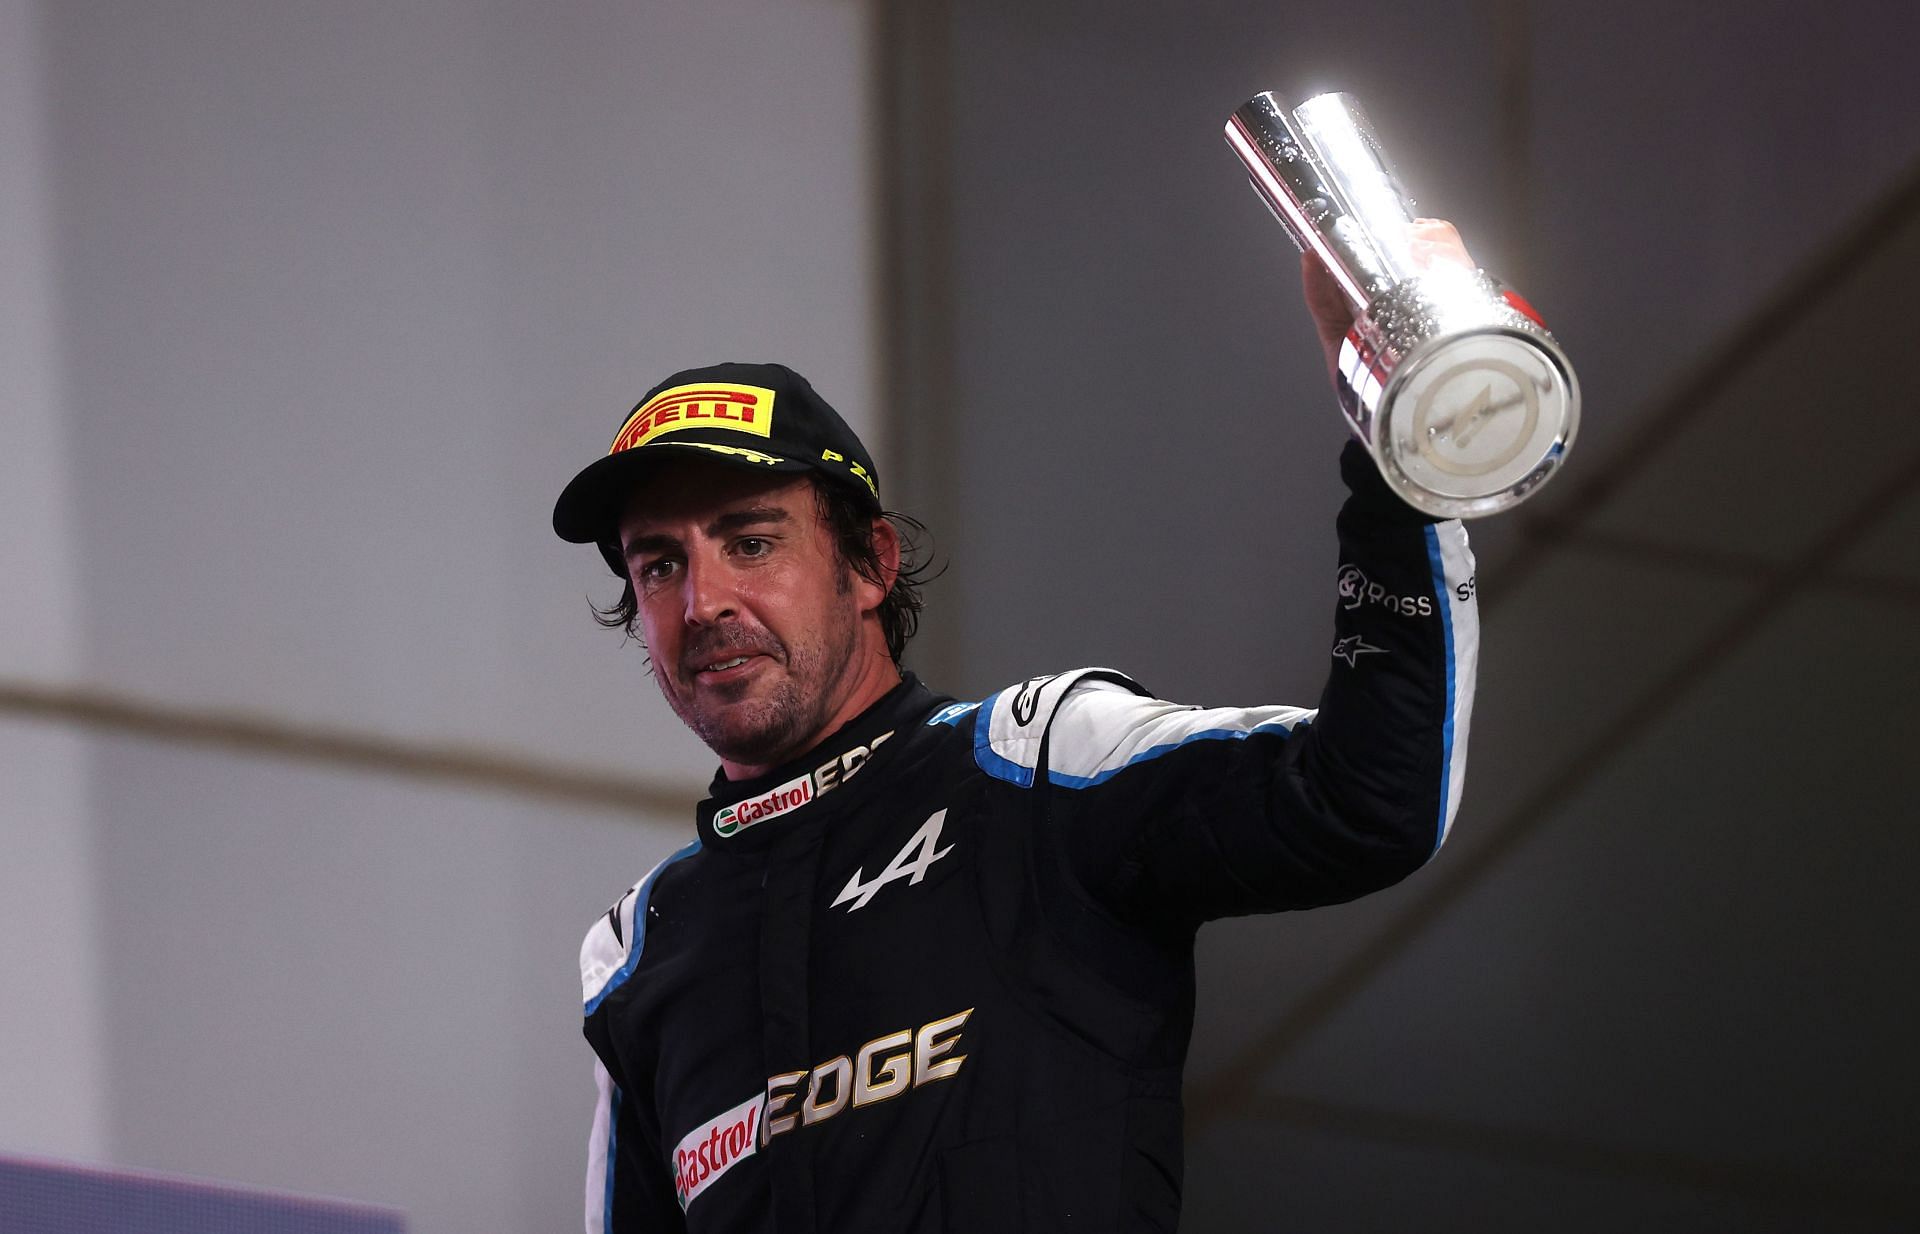 F1 Grand Prix of Qatar - Fernando Alonso on the podium after a gap of seven years